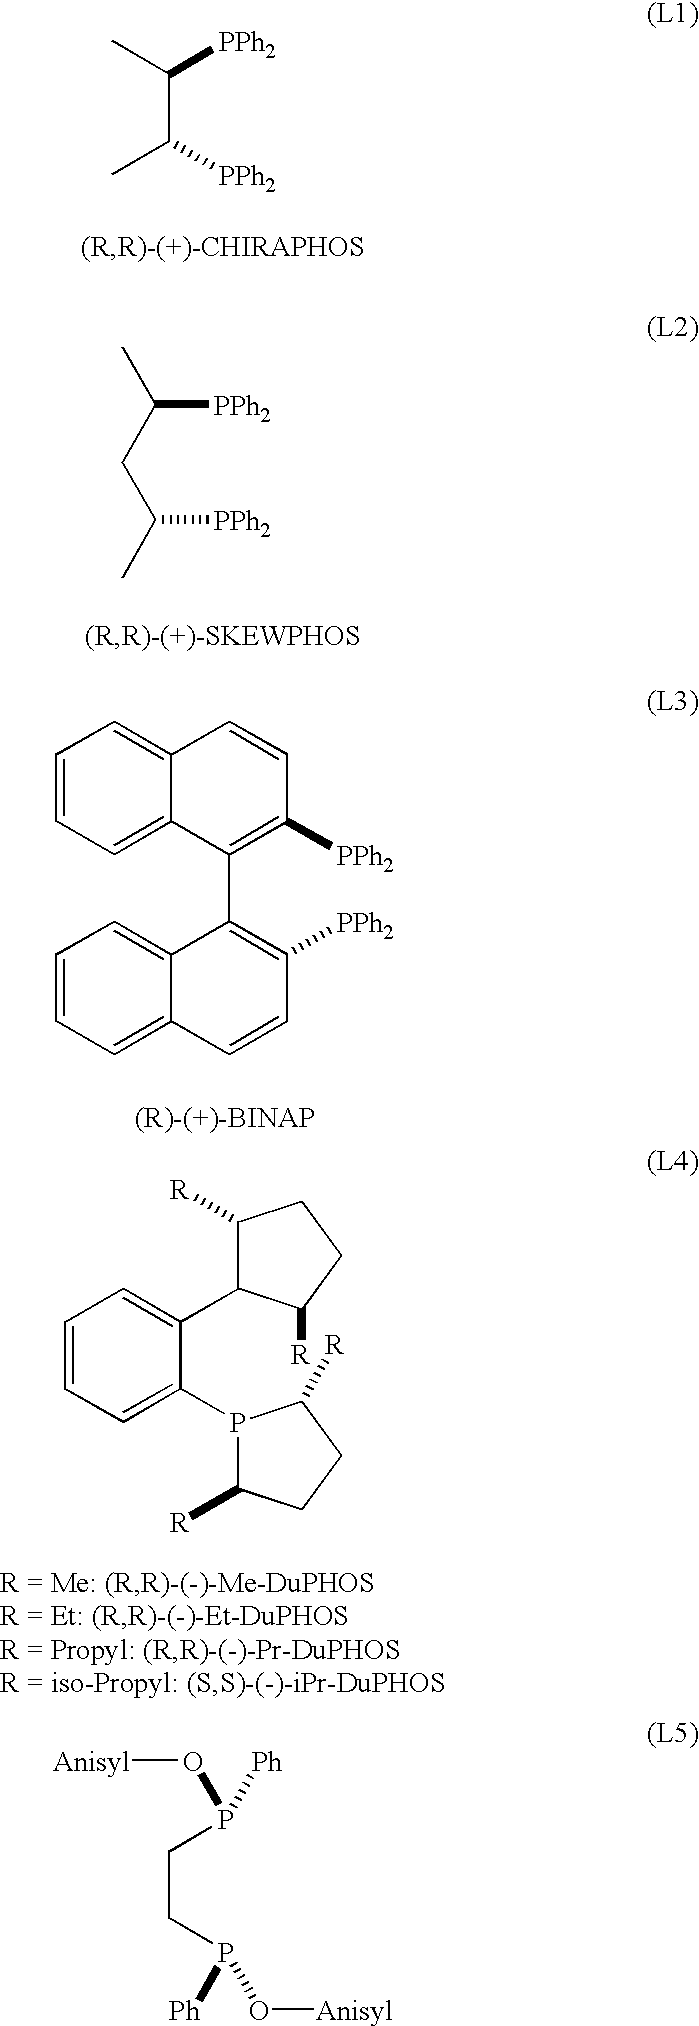 Ruthenium catalysts and method for making same